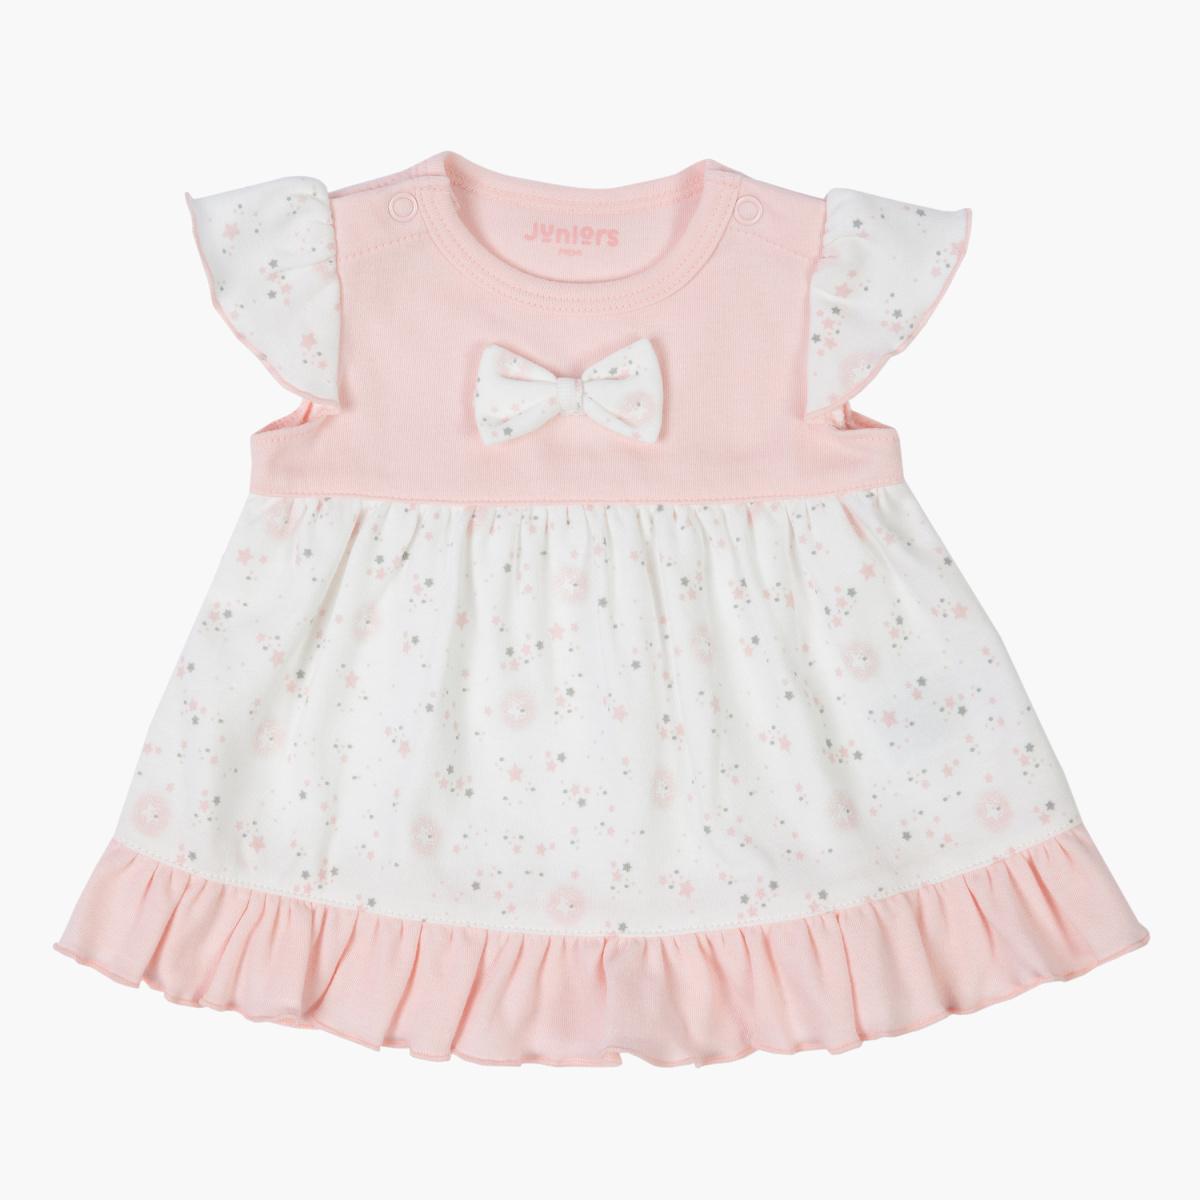 Juniors Printed Dress with Cap Sleeves and Bow Det